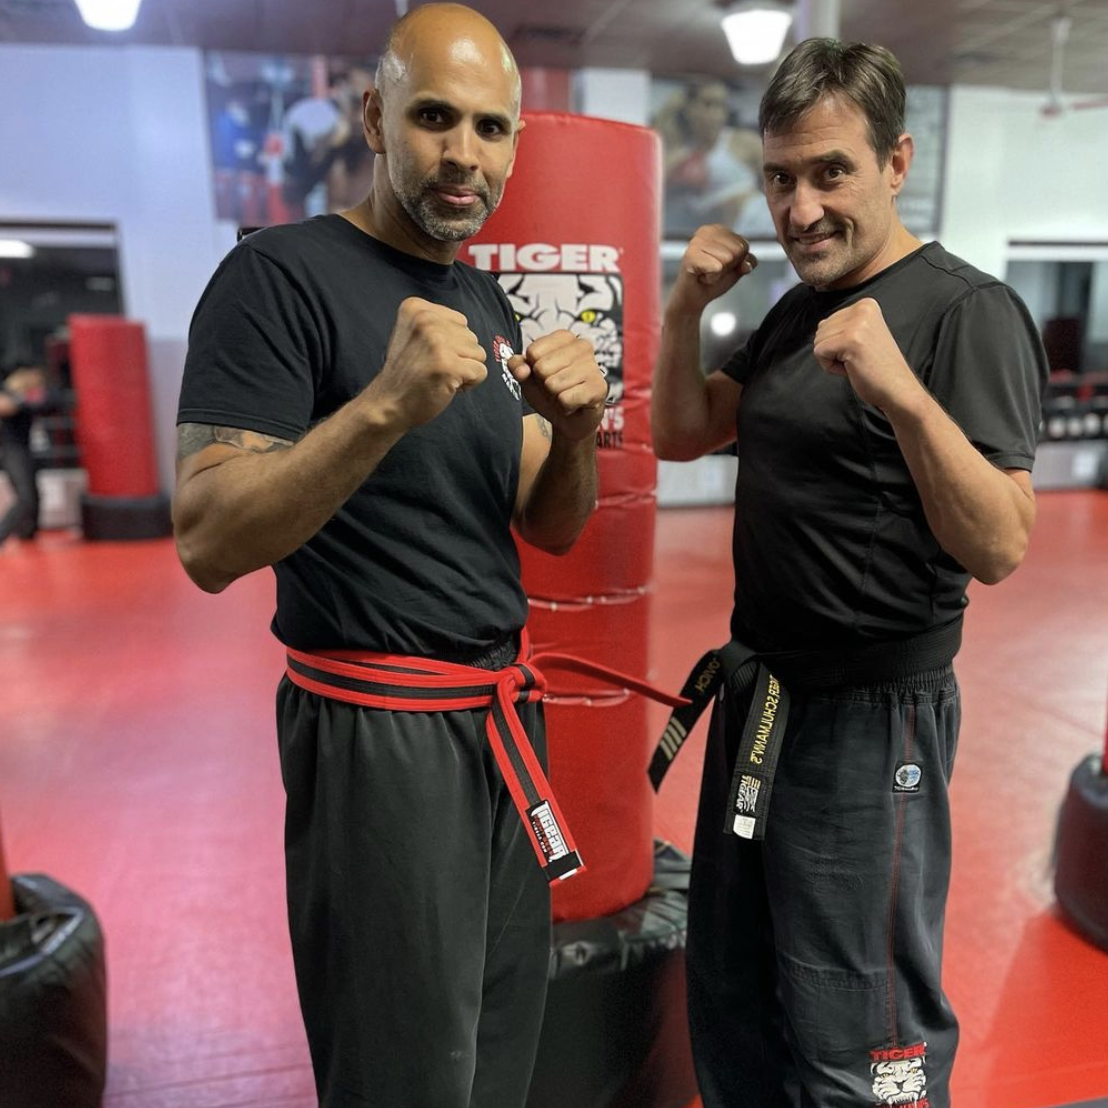 Two martial arts experts at Tiger Schulmann's Astoria